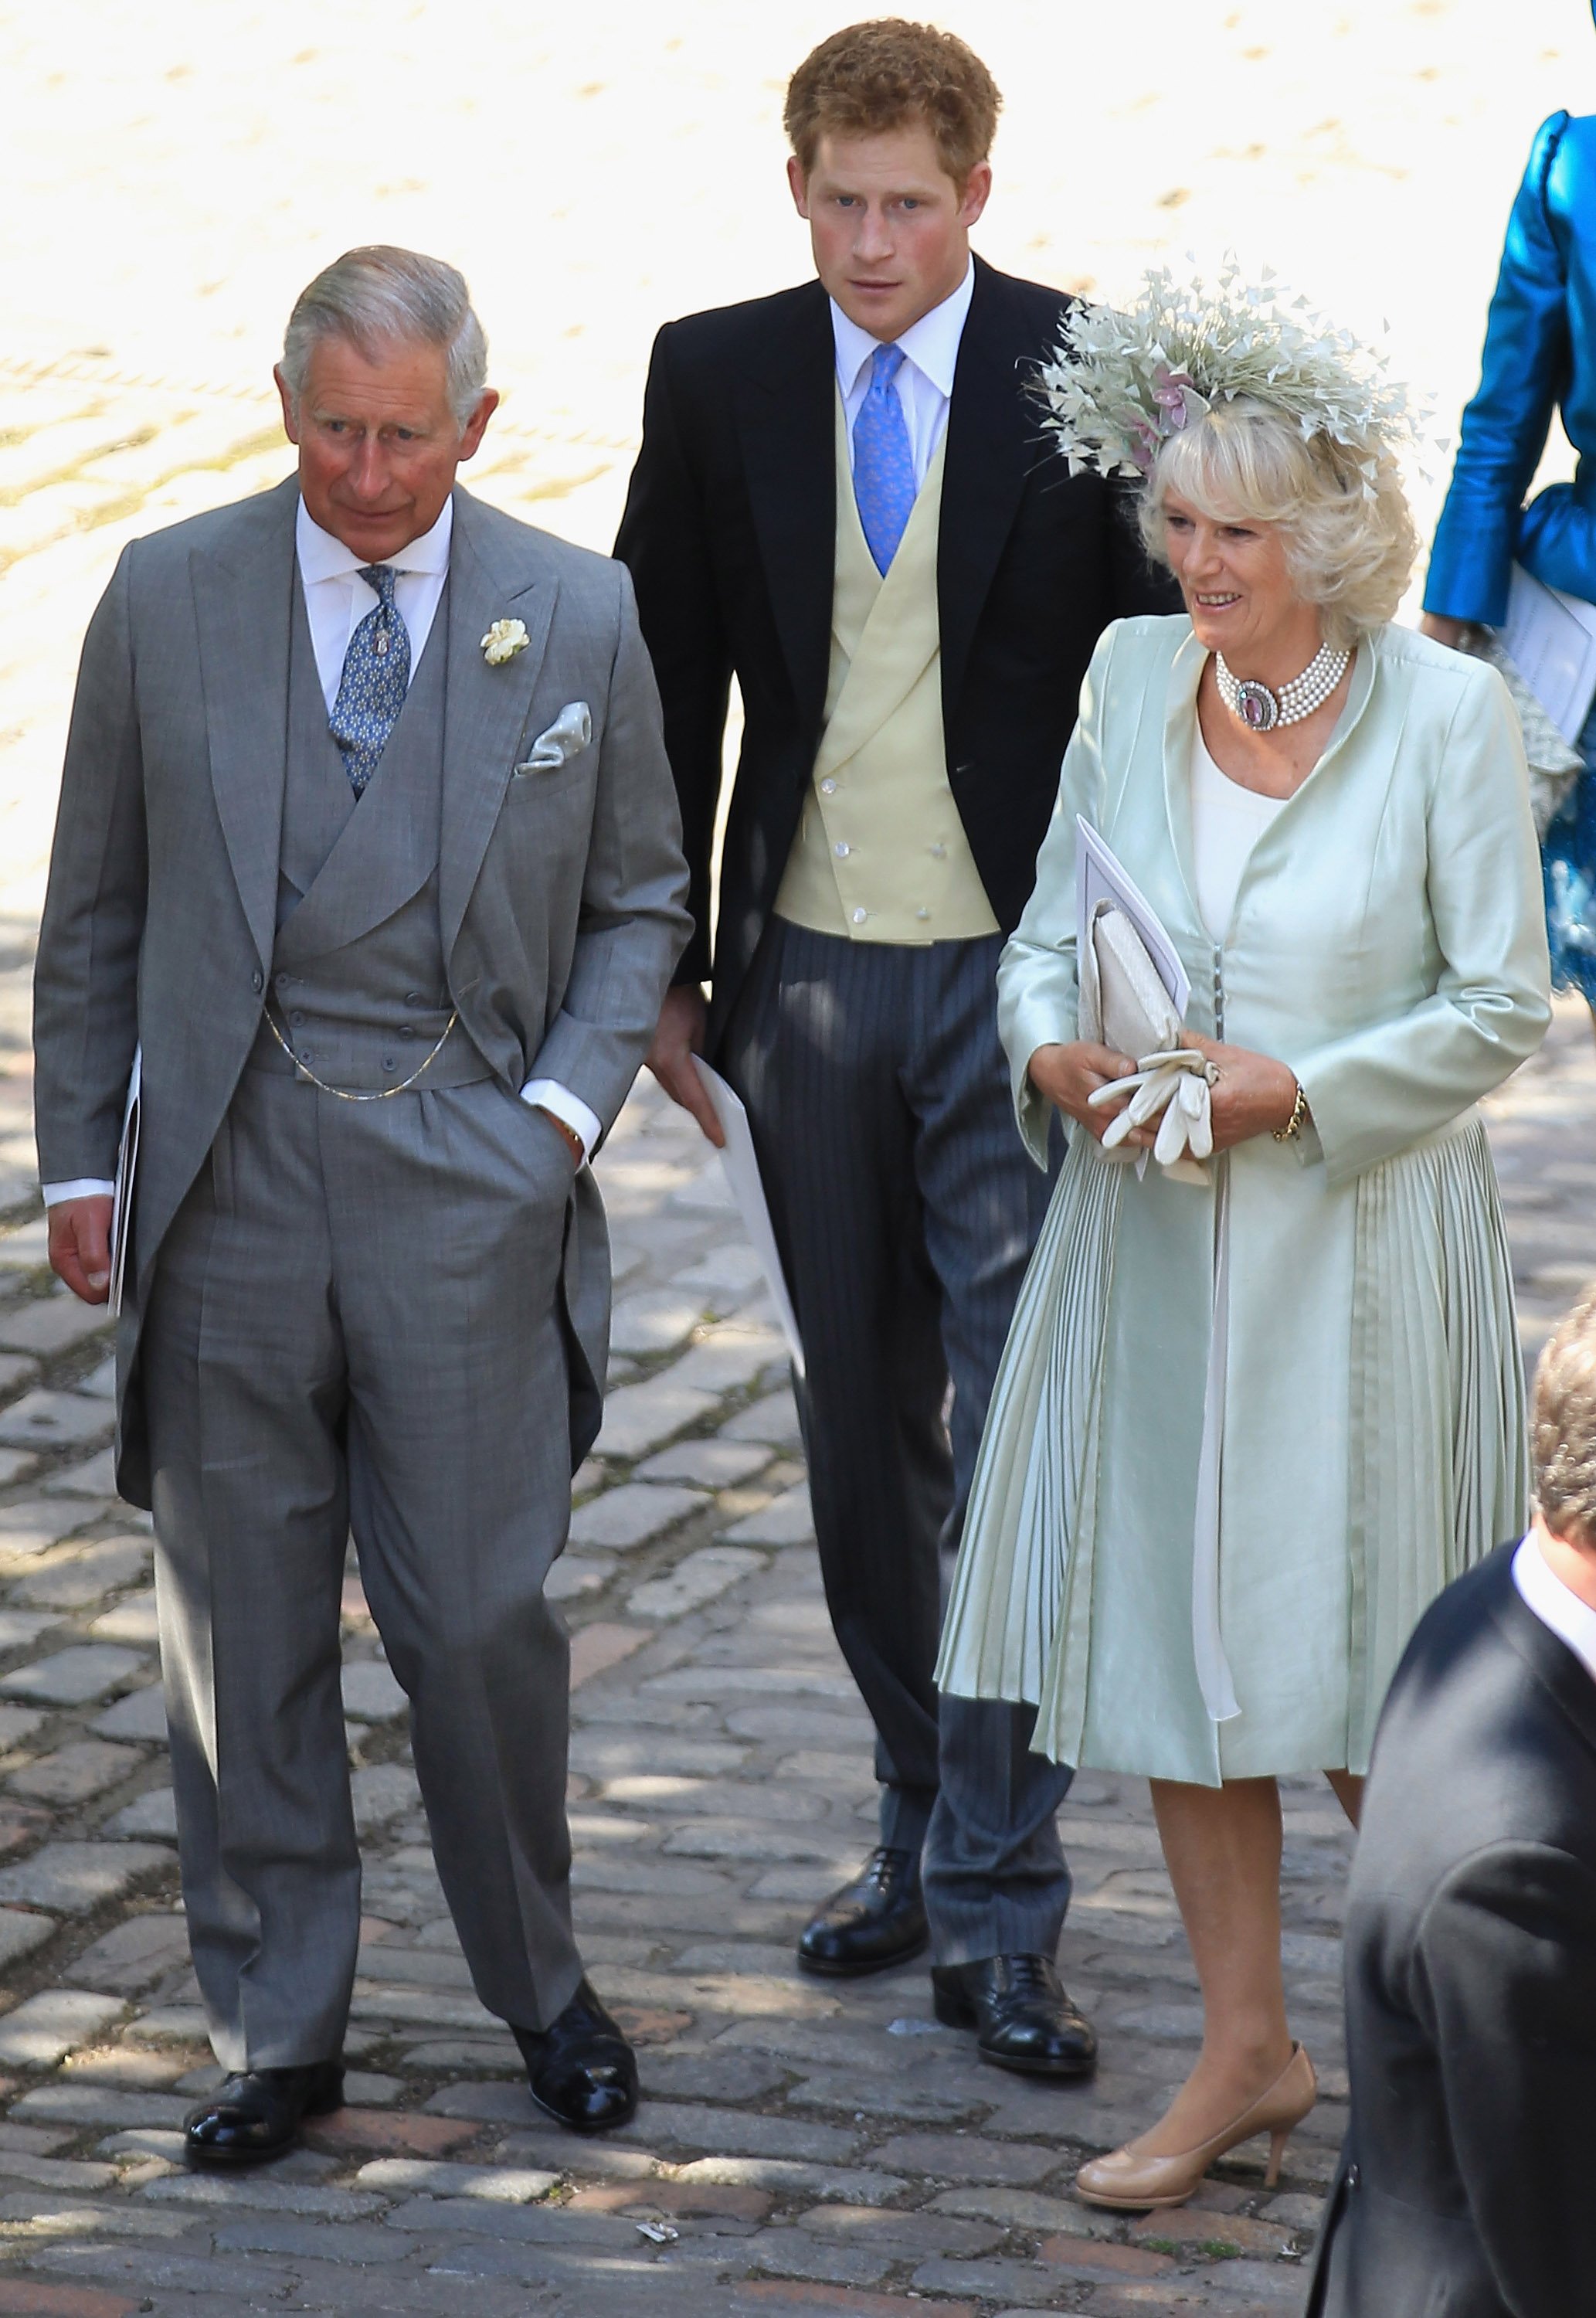 Then-Prince Charles, Prince Harry, and Camilla Parker Bowles at the wedding of Mike Tindall and Zara Philips